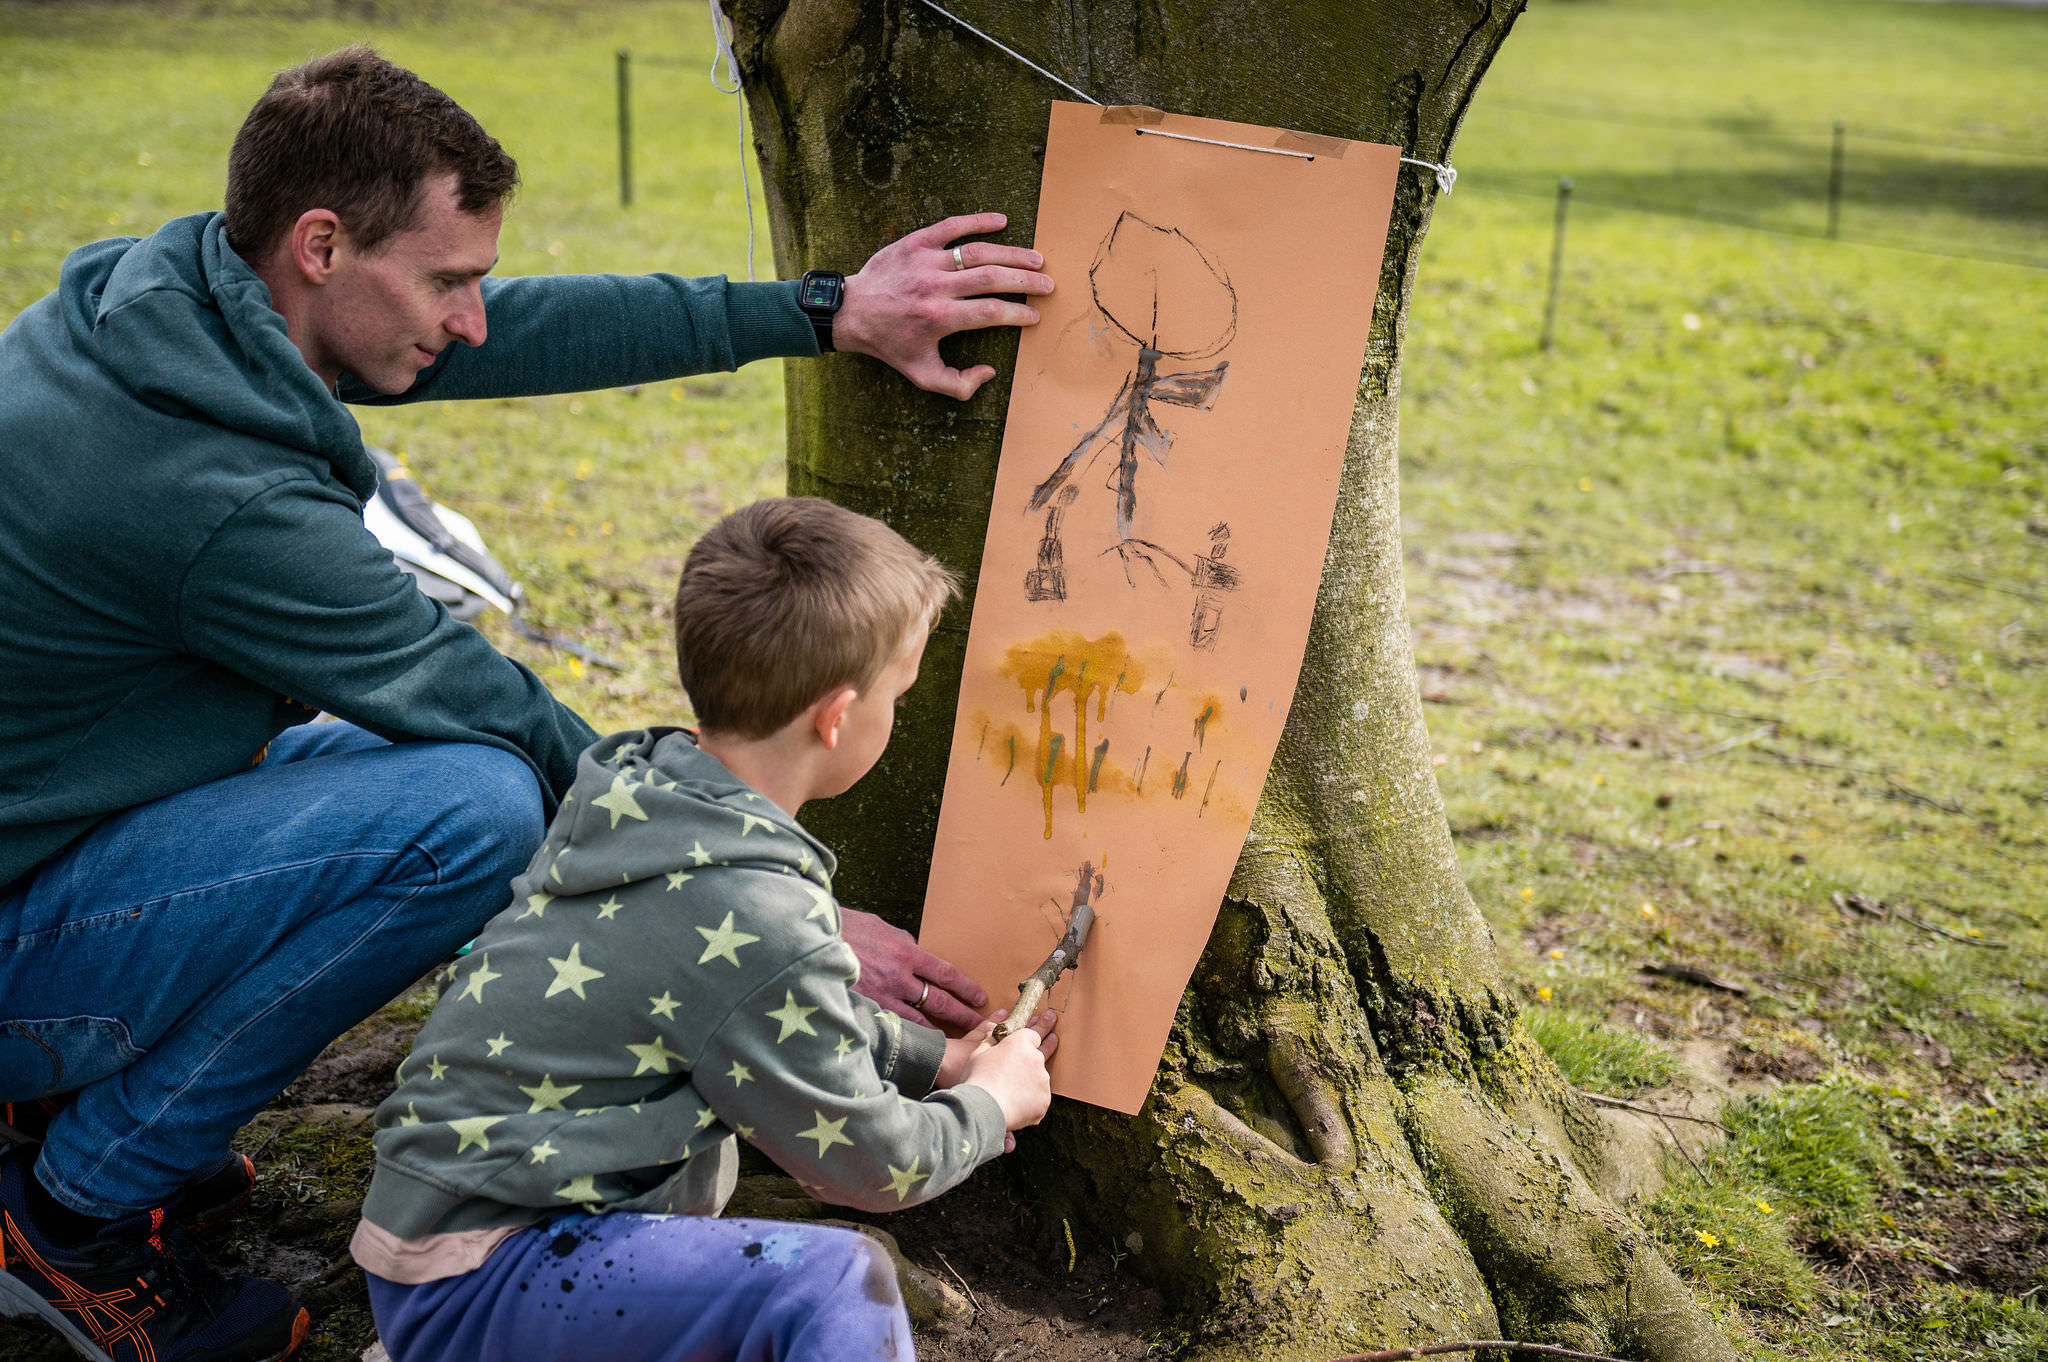 An adult and a child drawing together onto a large piece of paper leaning against a tree outdoors.